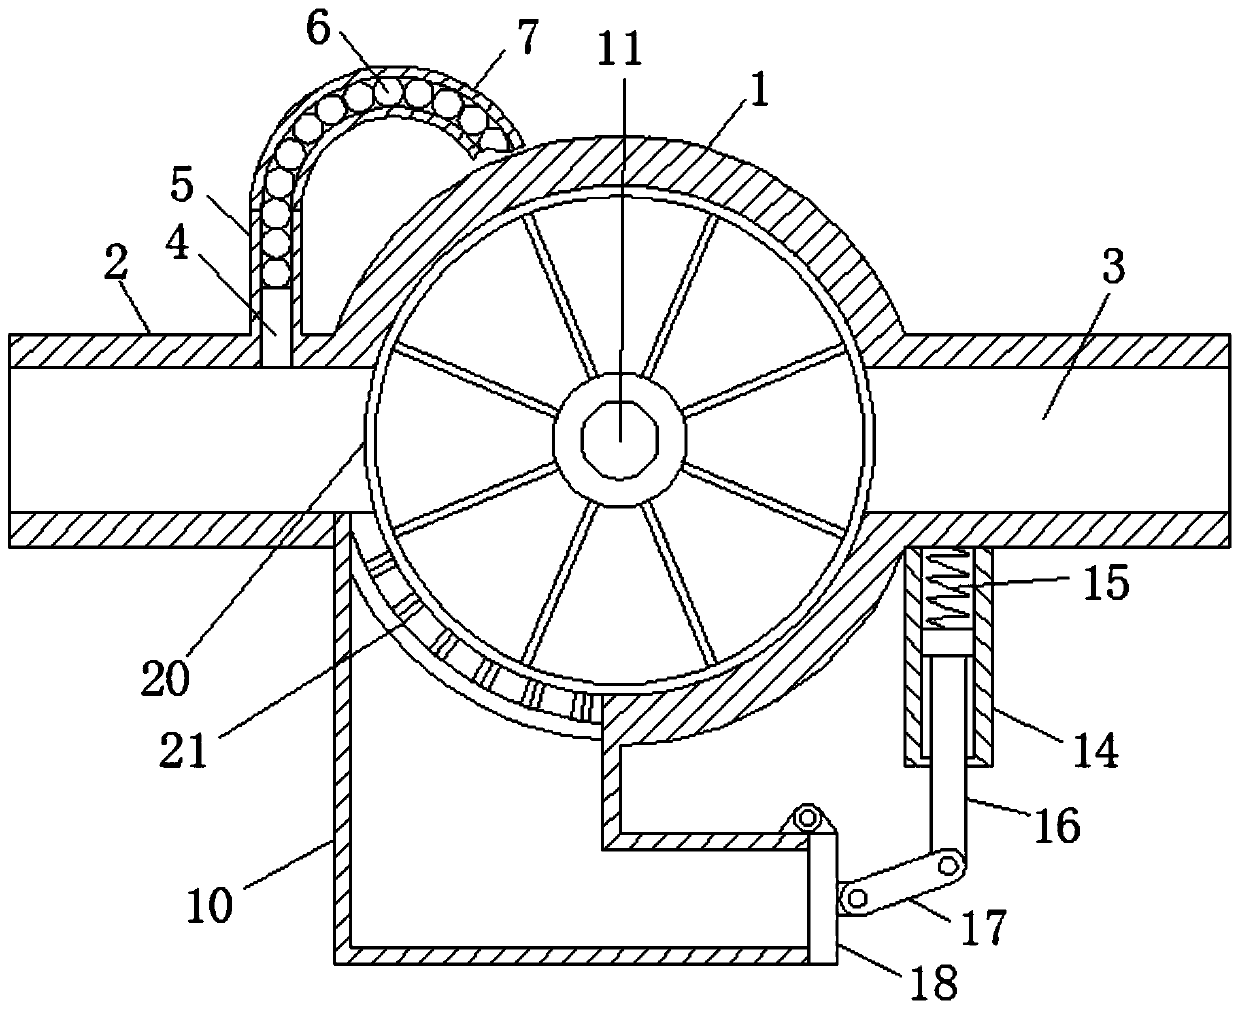 Valve body with filtering function